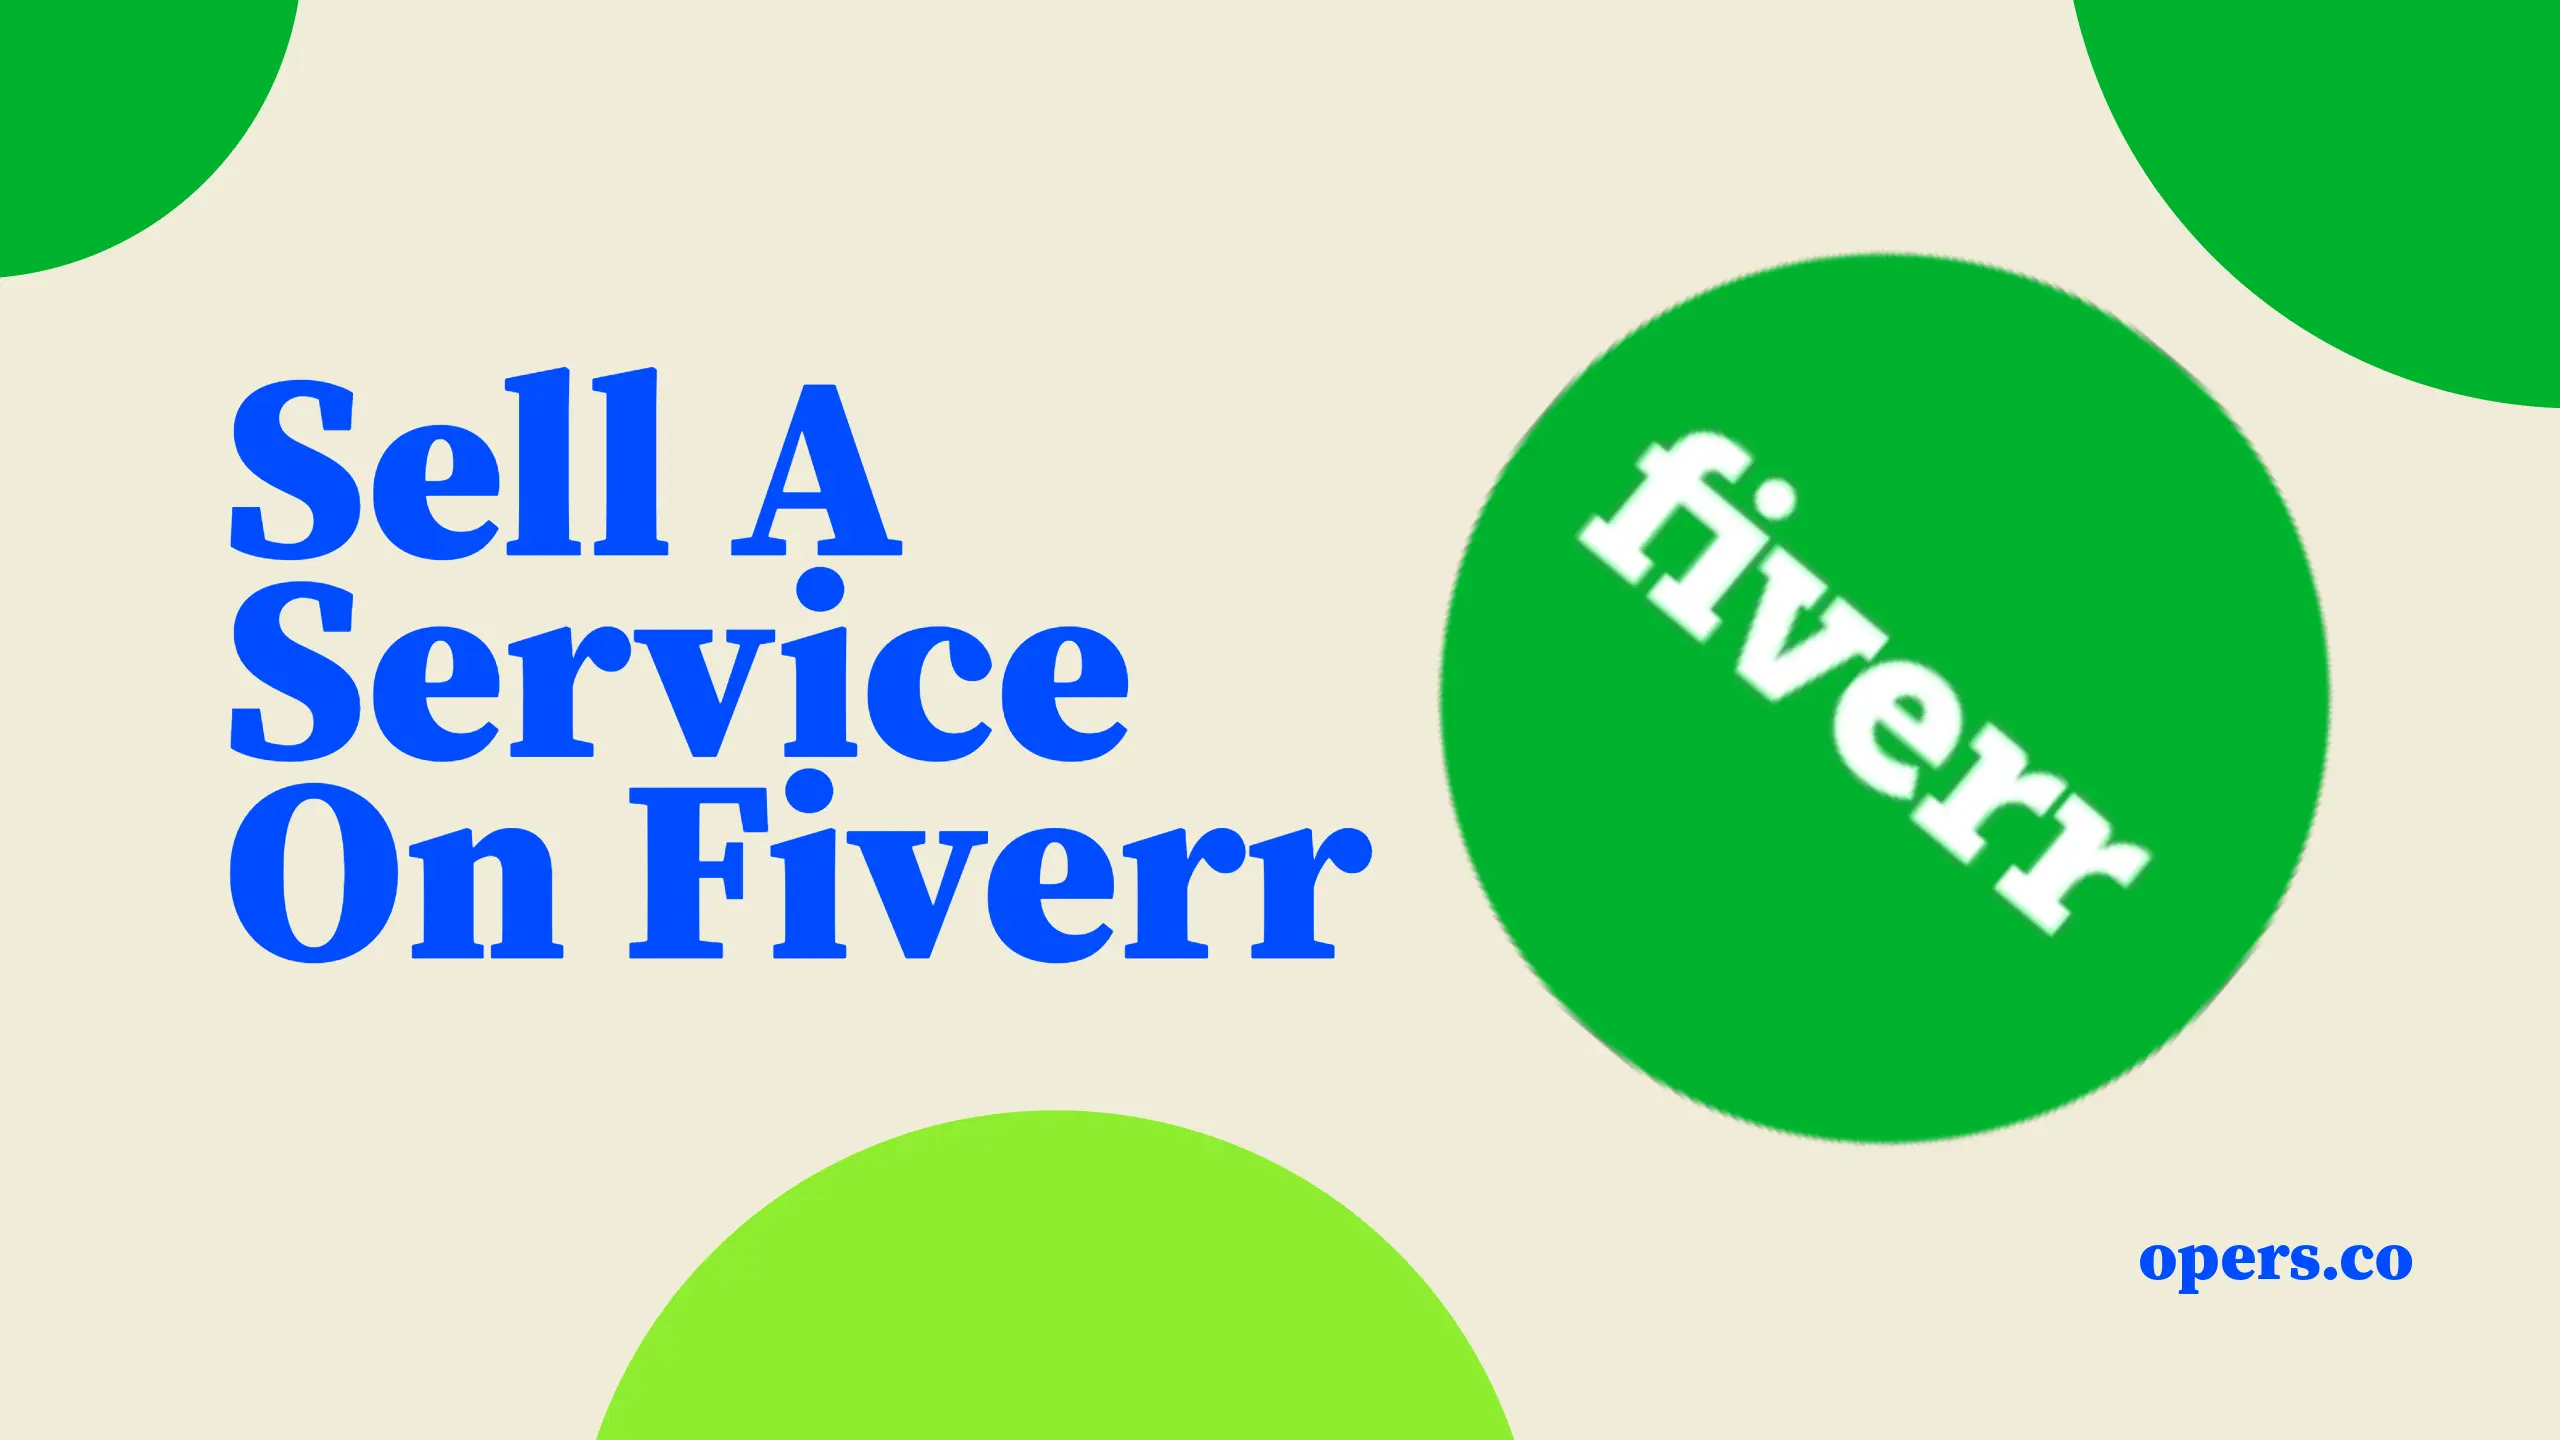 Sell a service on fiverr